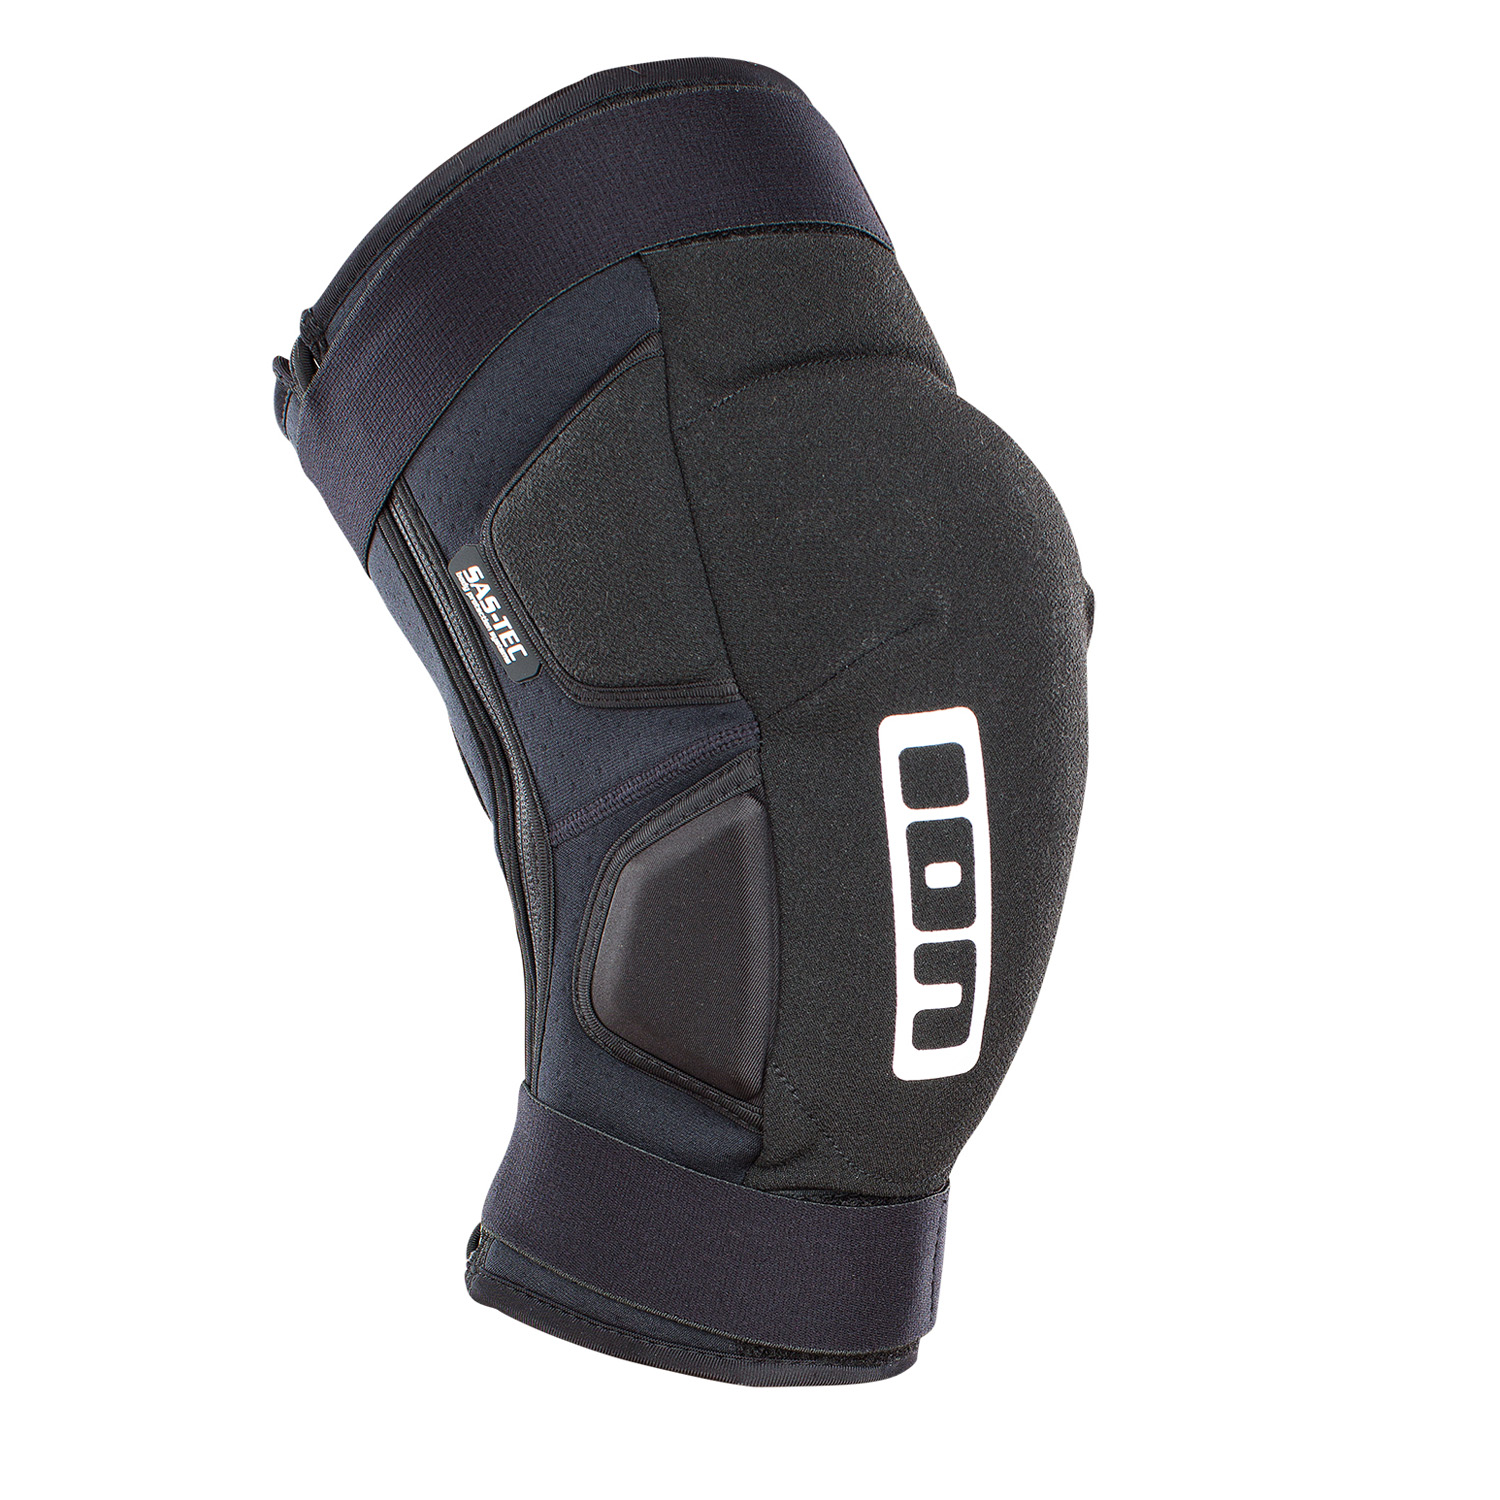 ION Knee Guard K_Pact_Amp Black